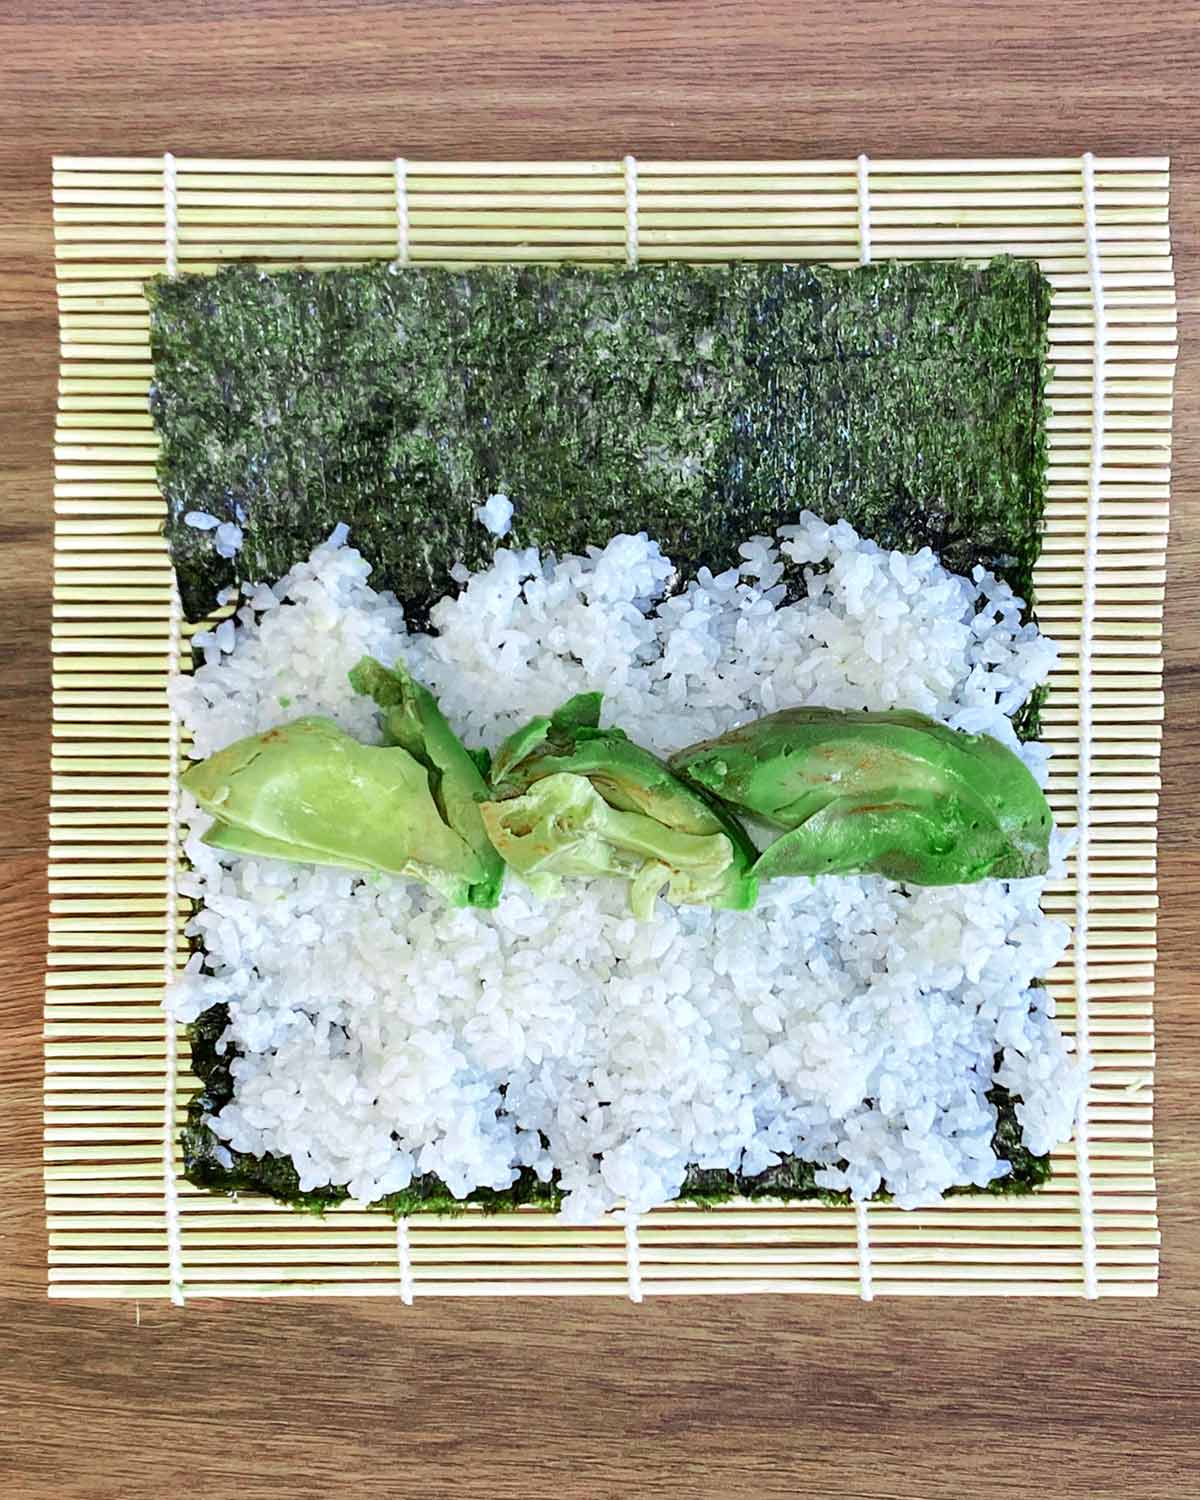 Sliced avocado added on top of the rice.